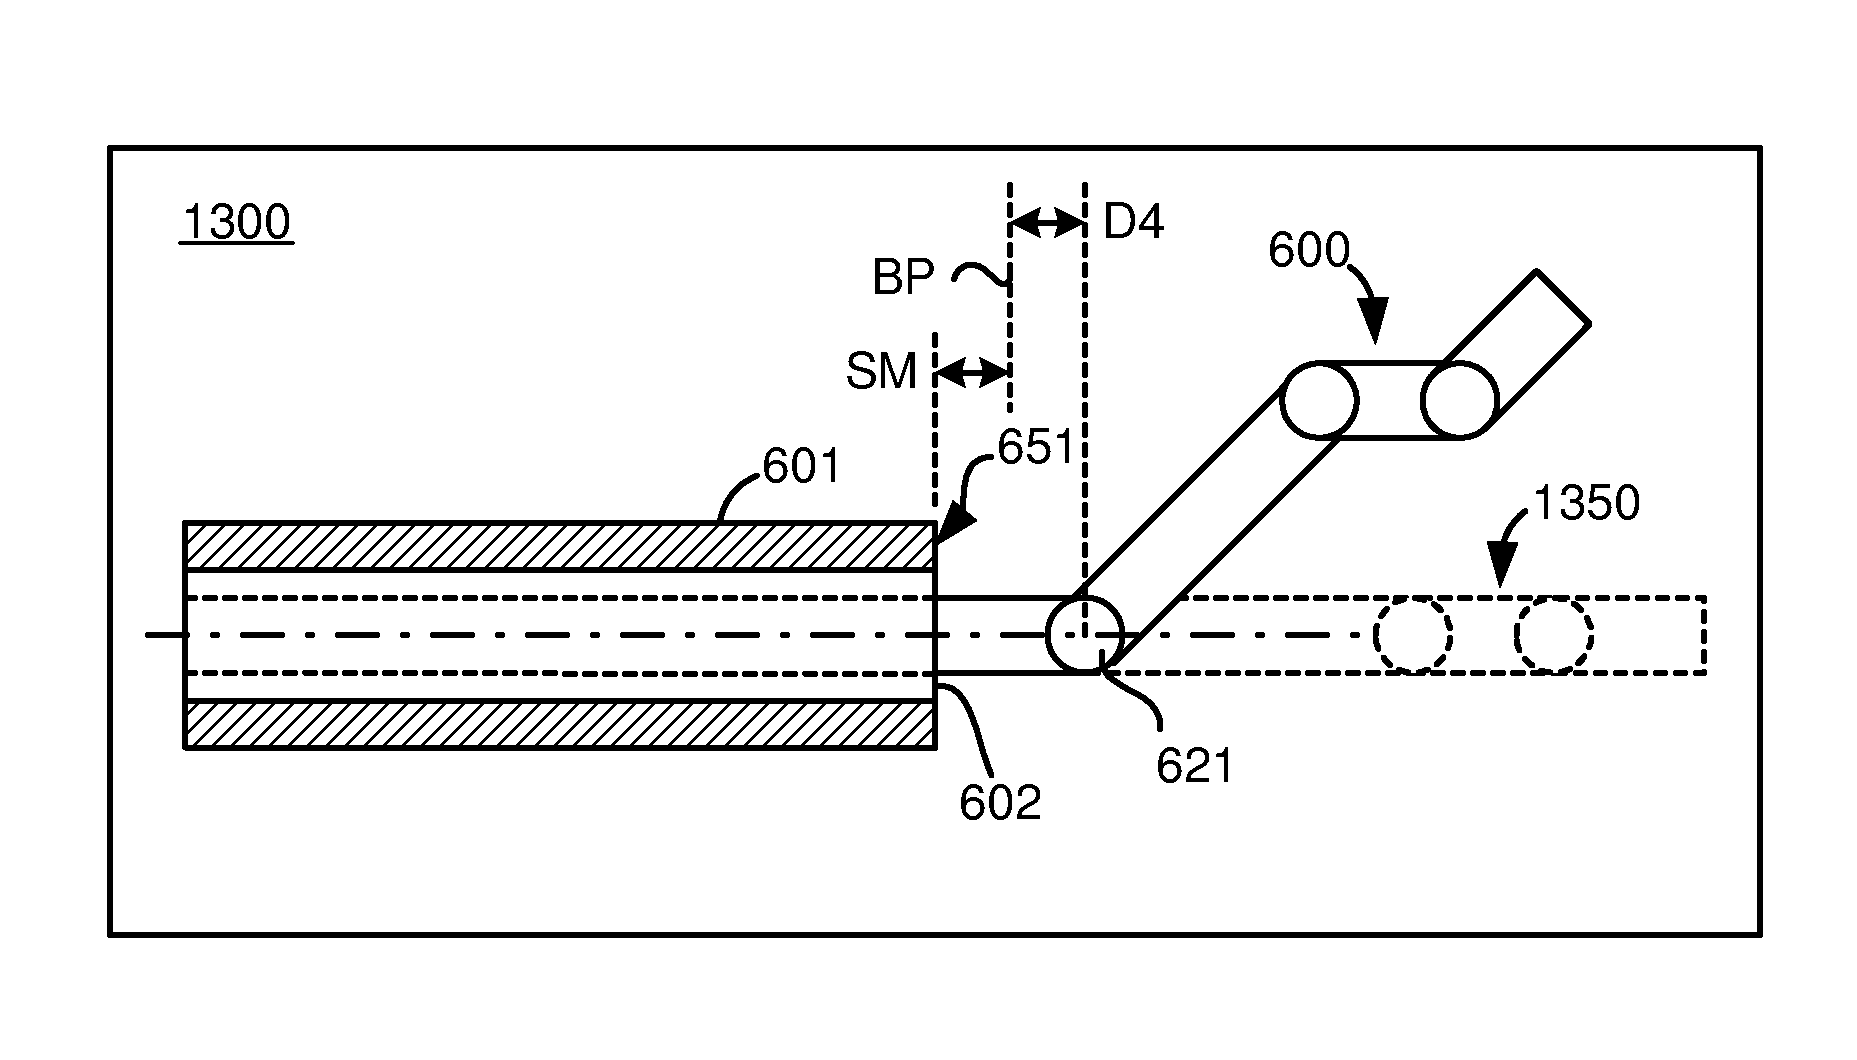 Controller assisted reconfiguration of an articulated instrument during movement into and out of an entry guide